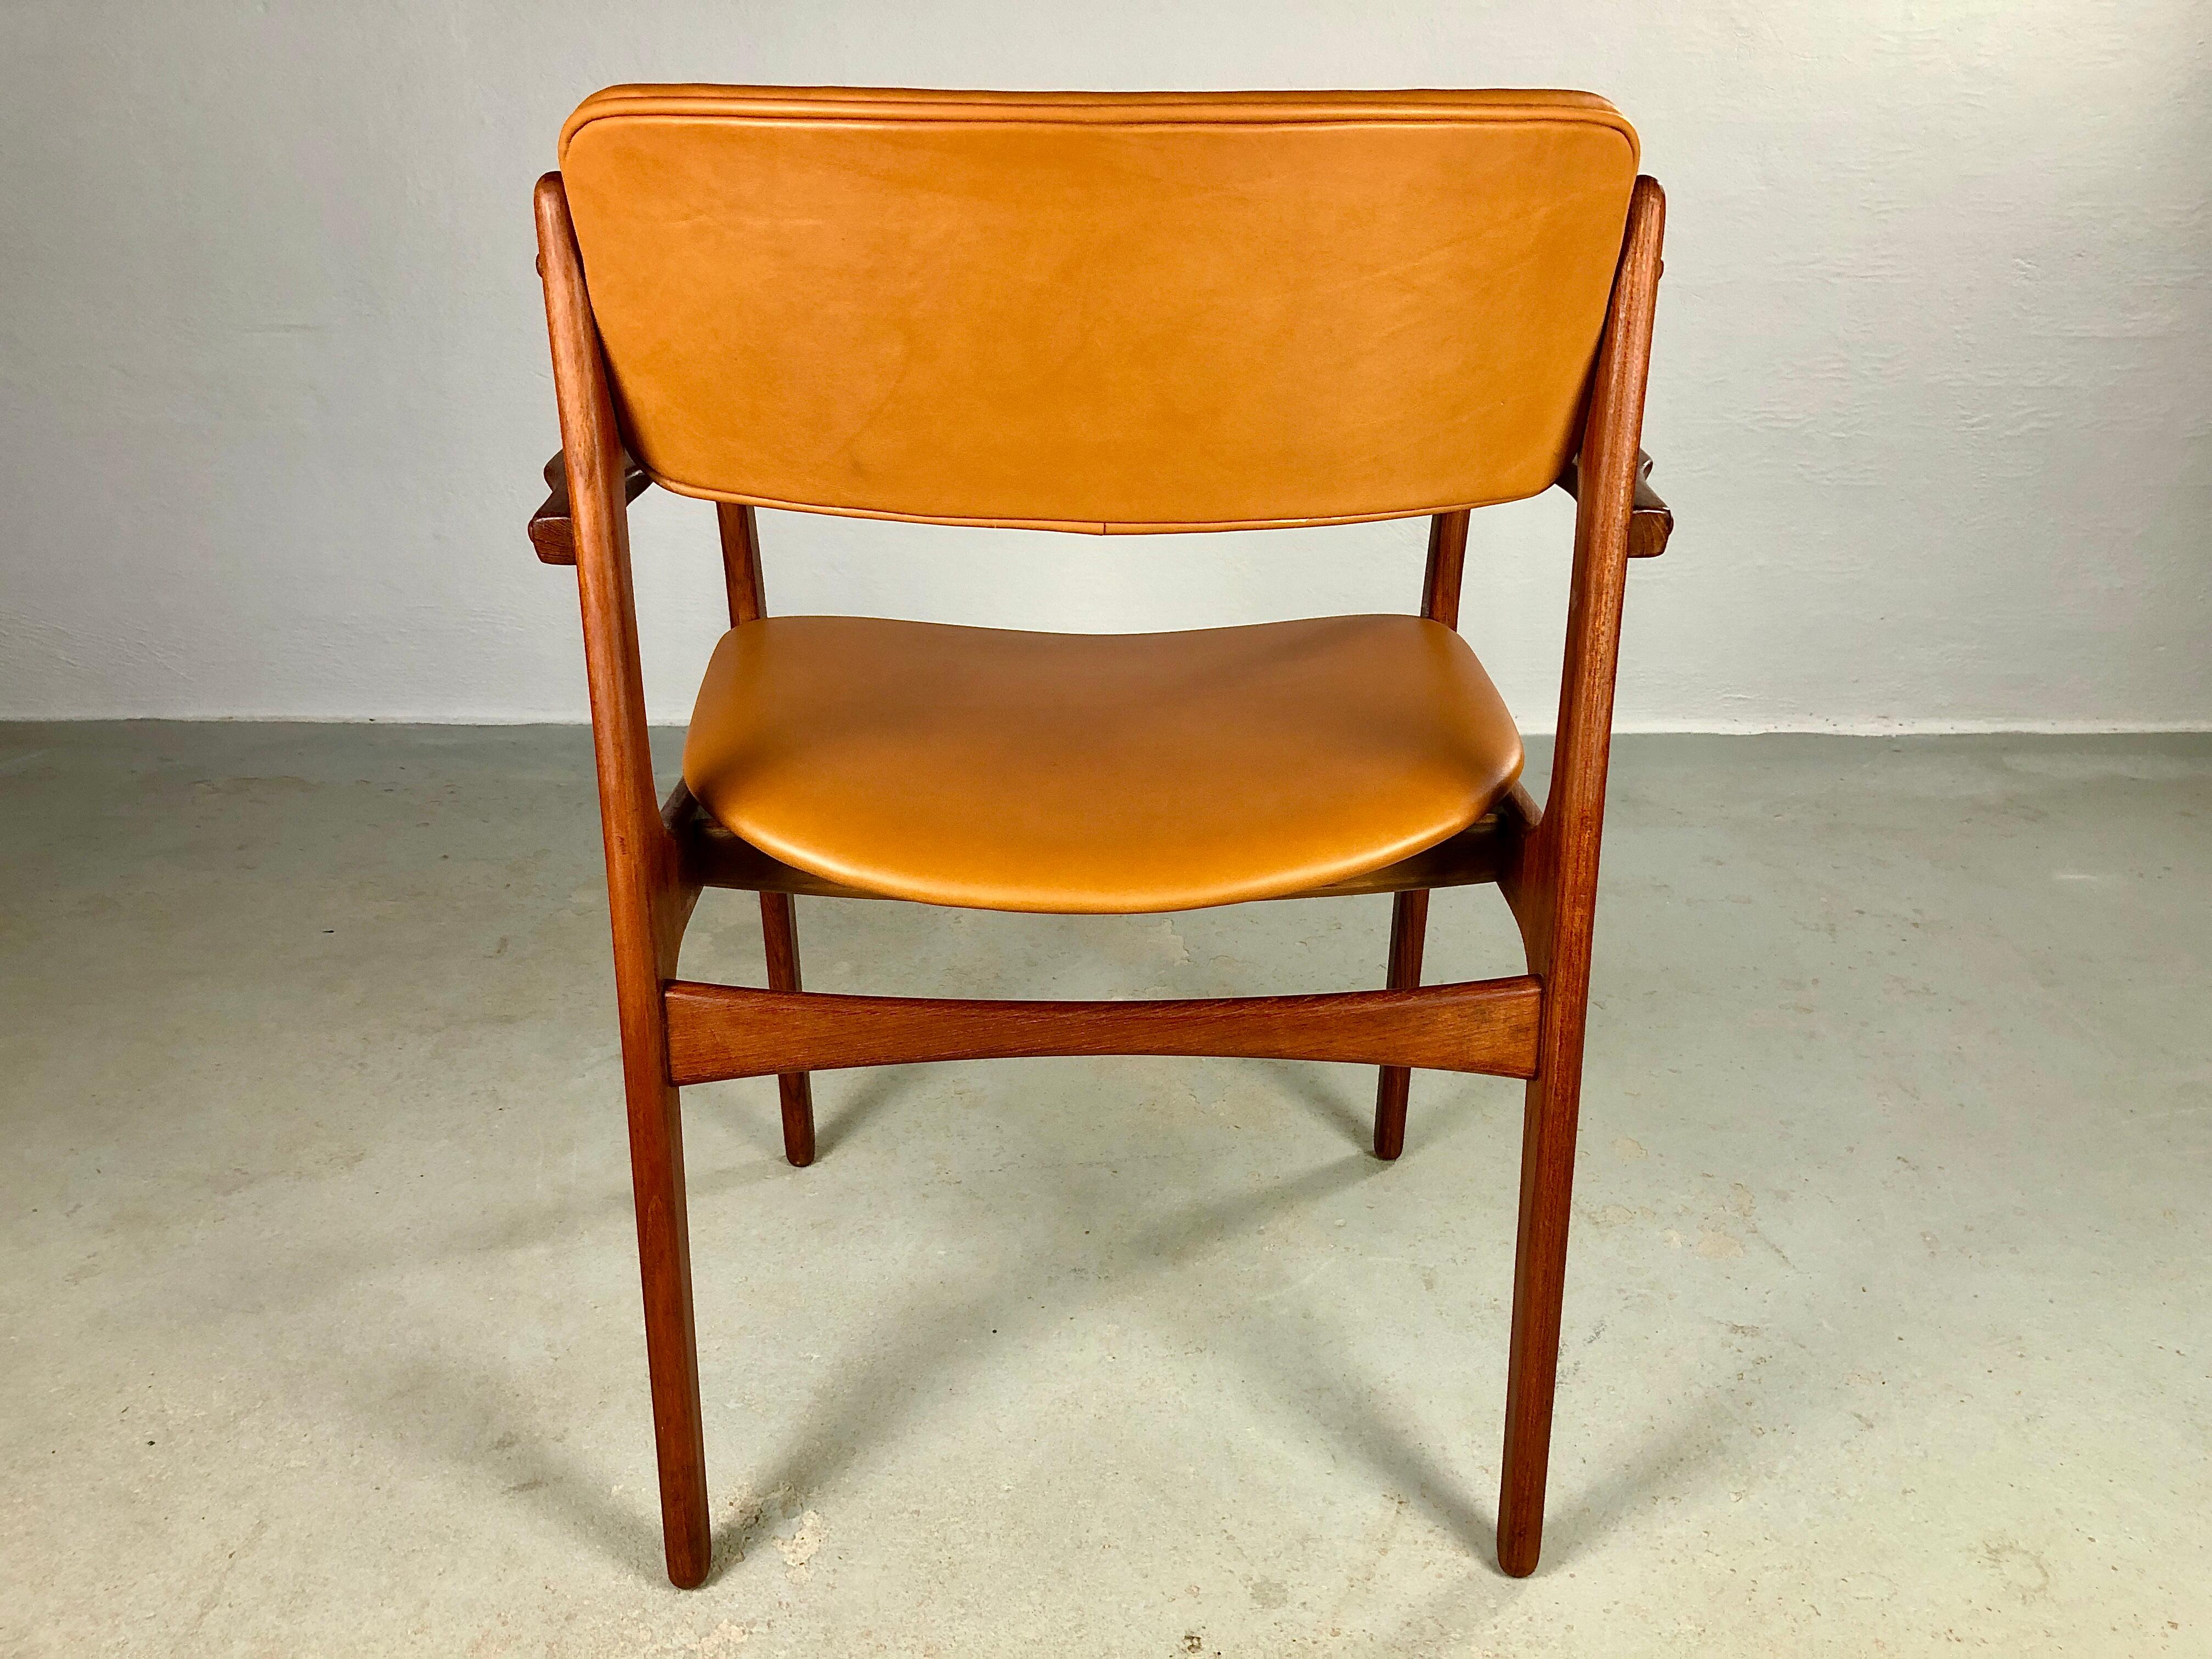 1960s Danish Erik Buch Fully Restored Armchairs in Teak, Custom Upholstery In Good Condition For Sale In Knebel, DK